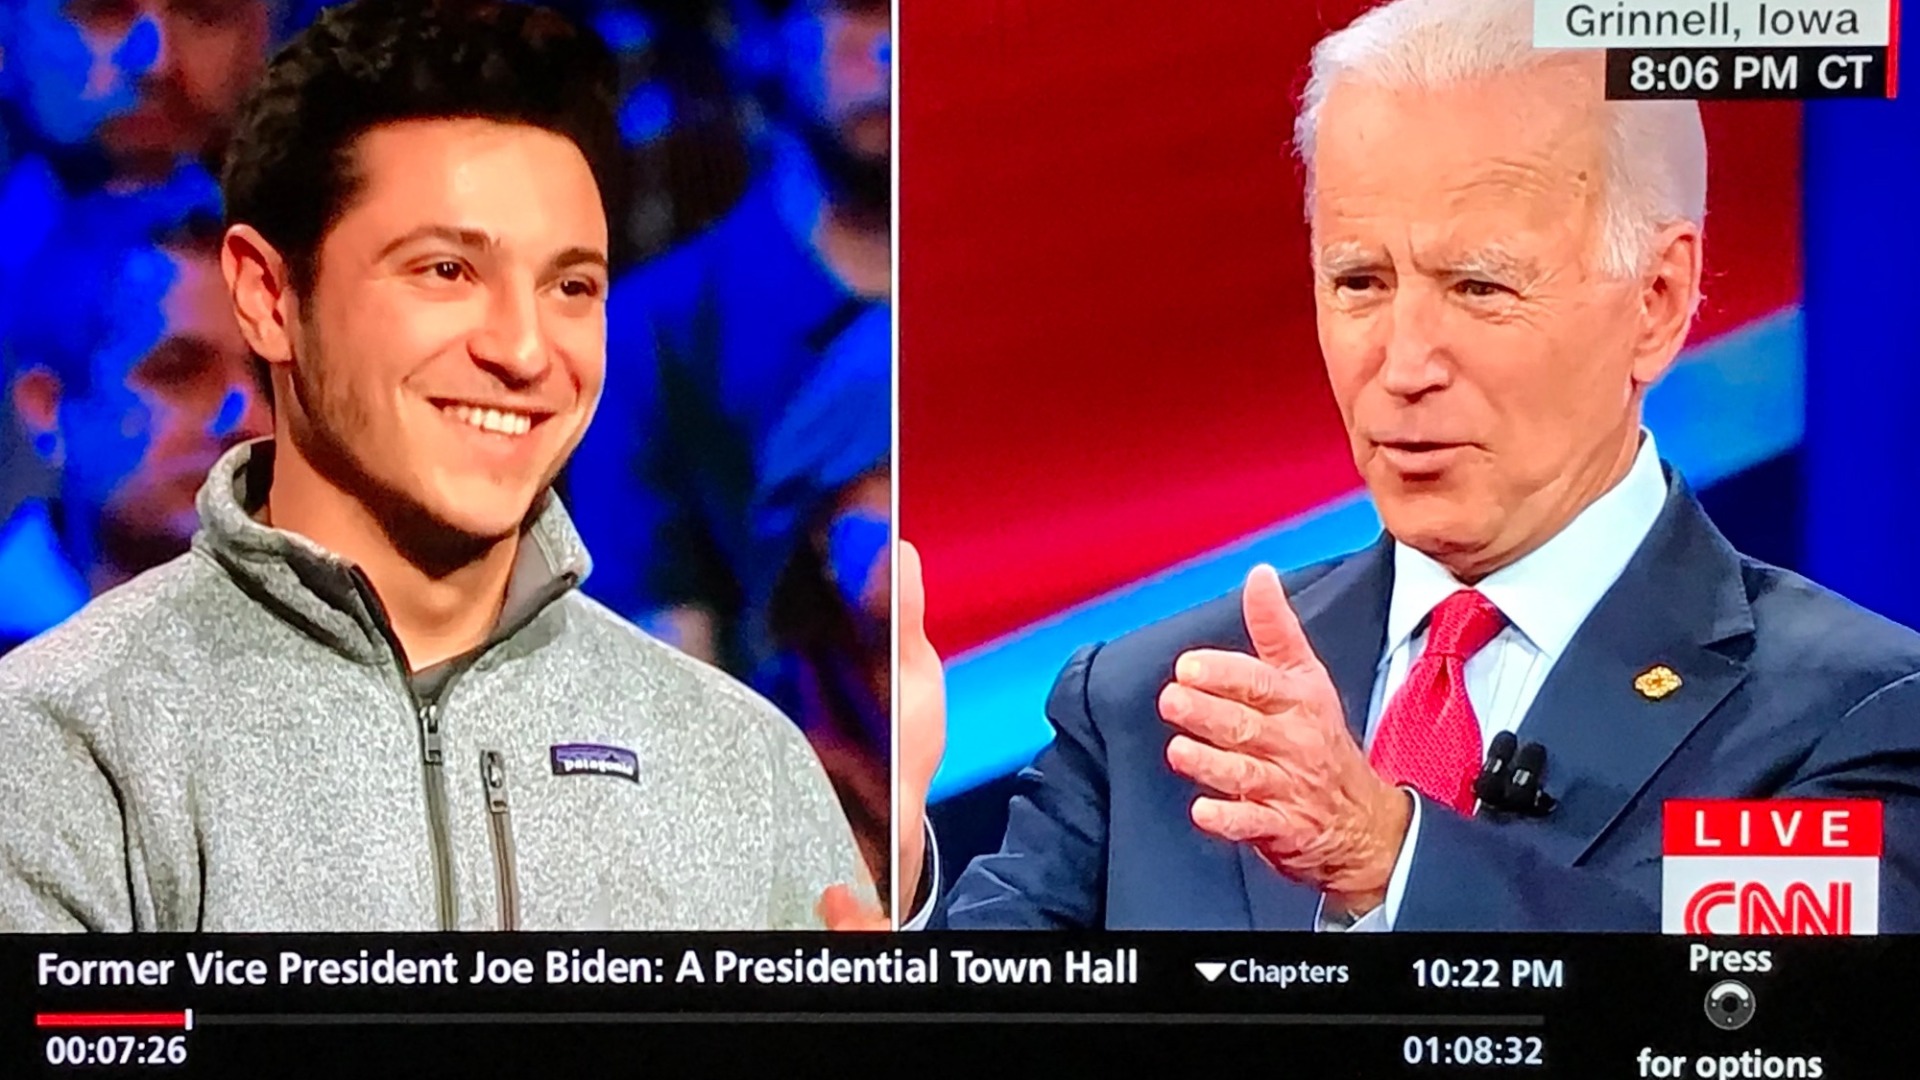 cnn interview recording image of student asking biden question 